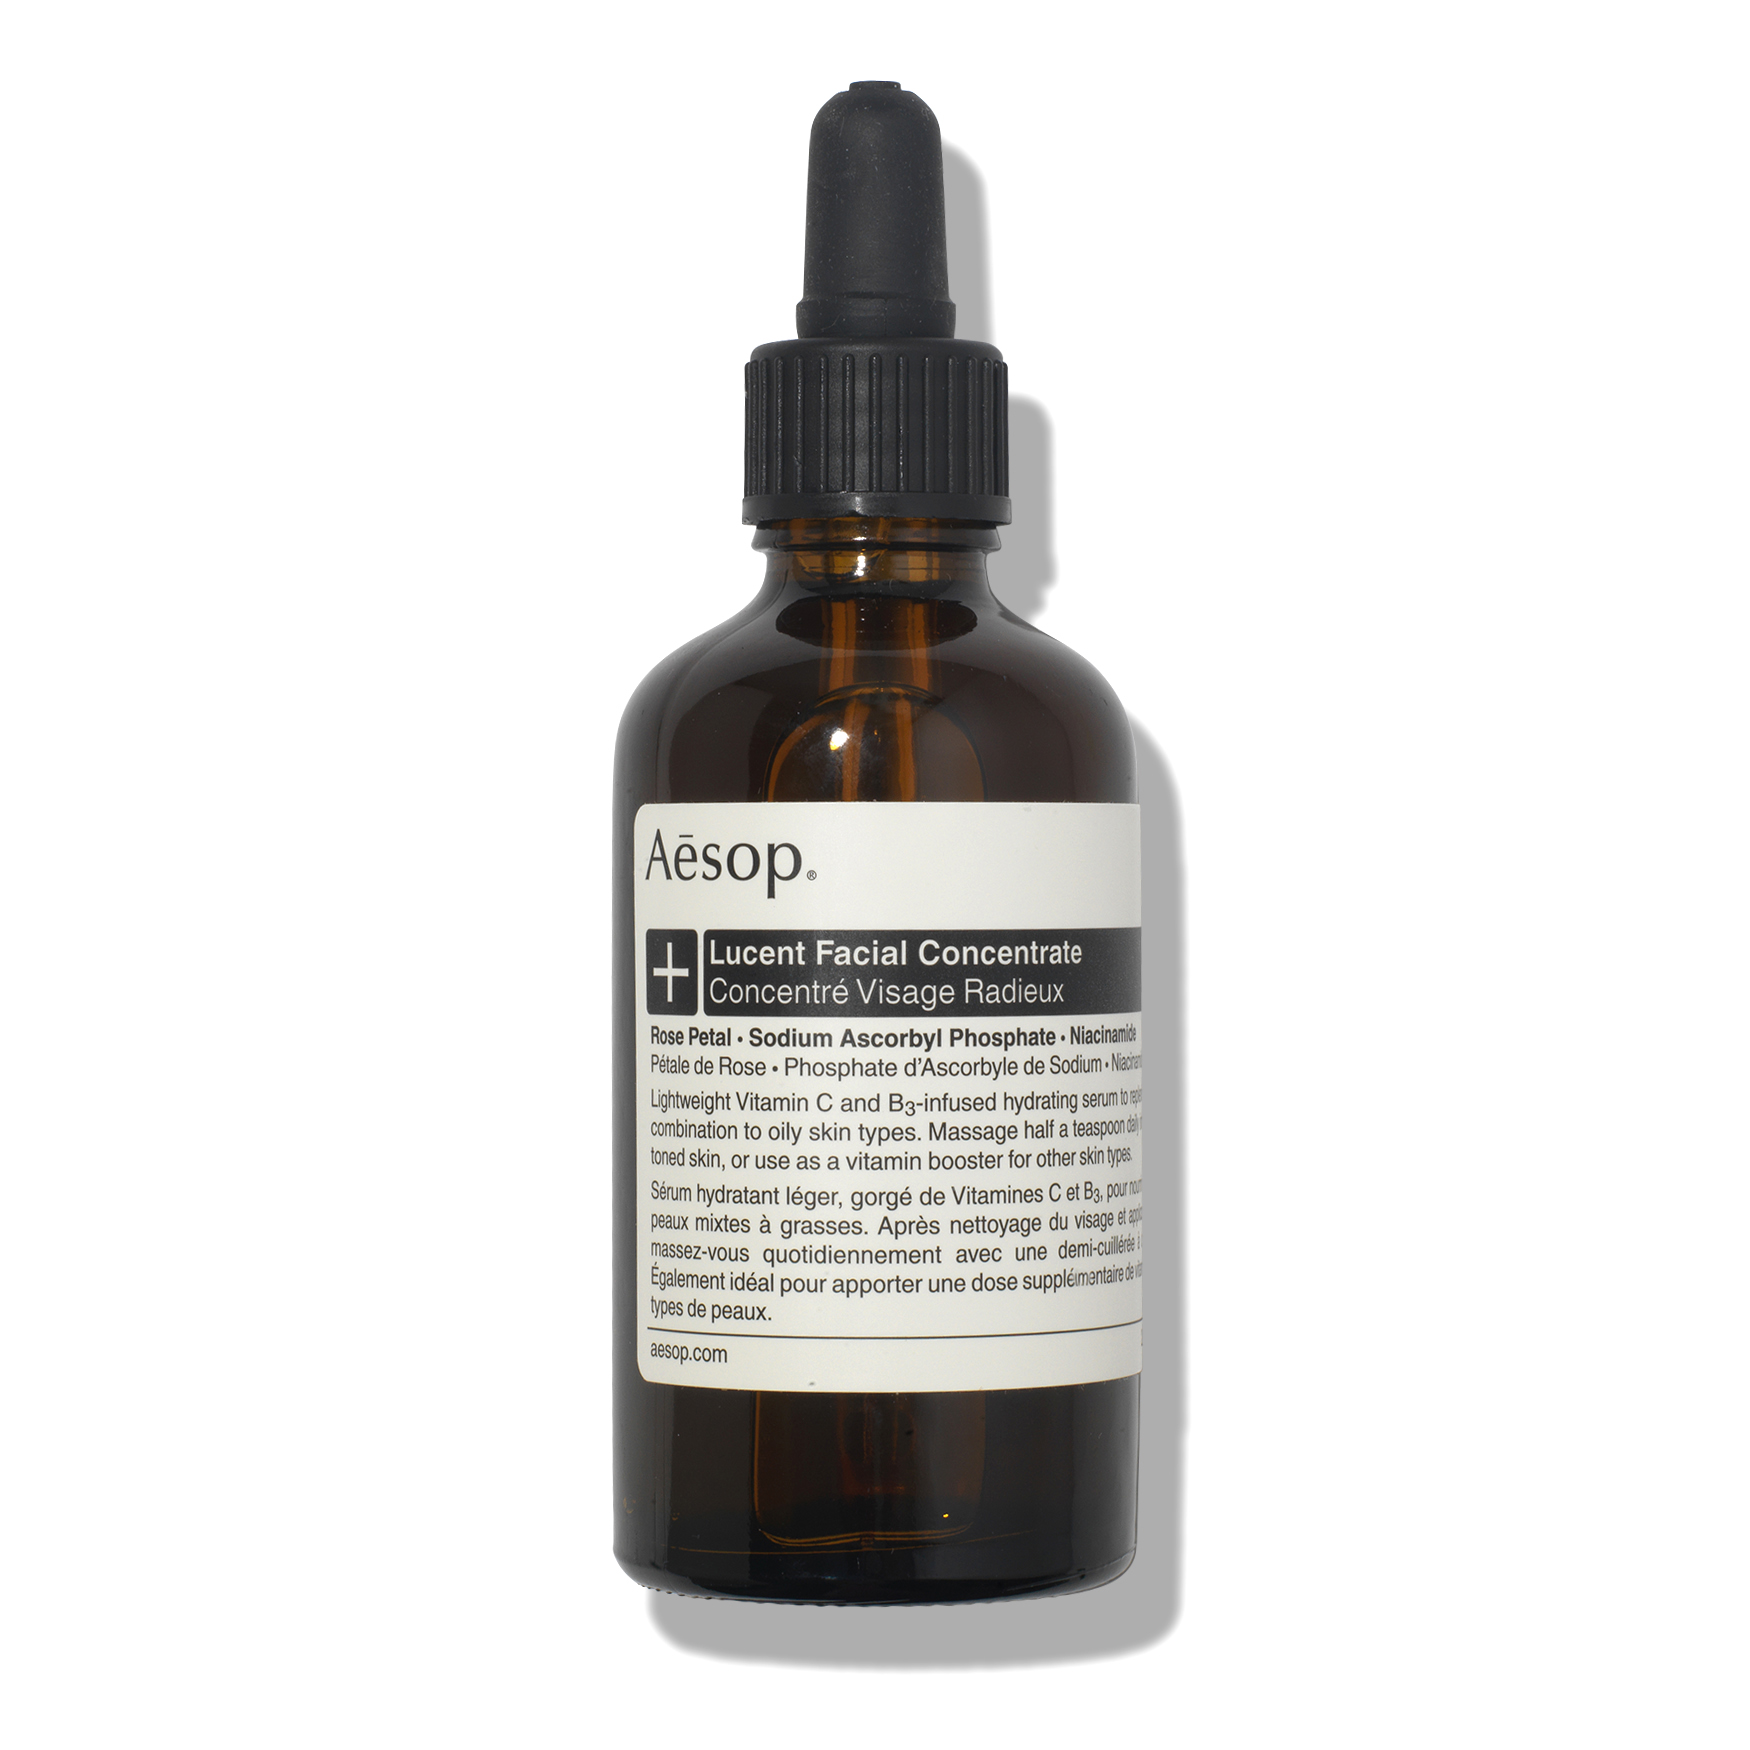 Aesop Lucent Facial Concentrate | Space NK